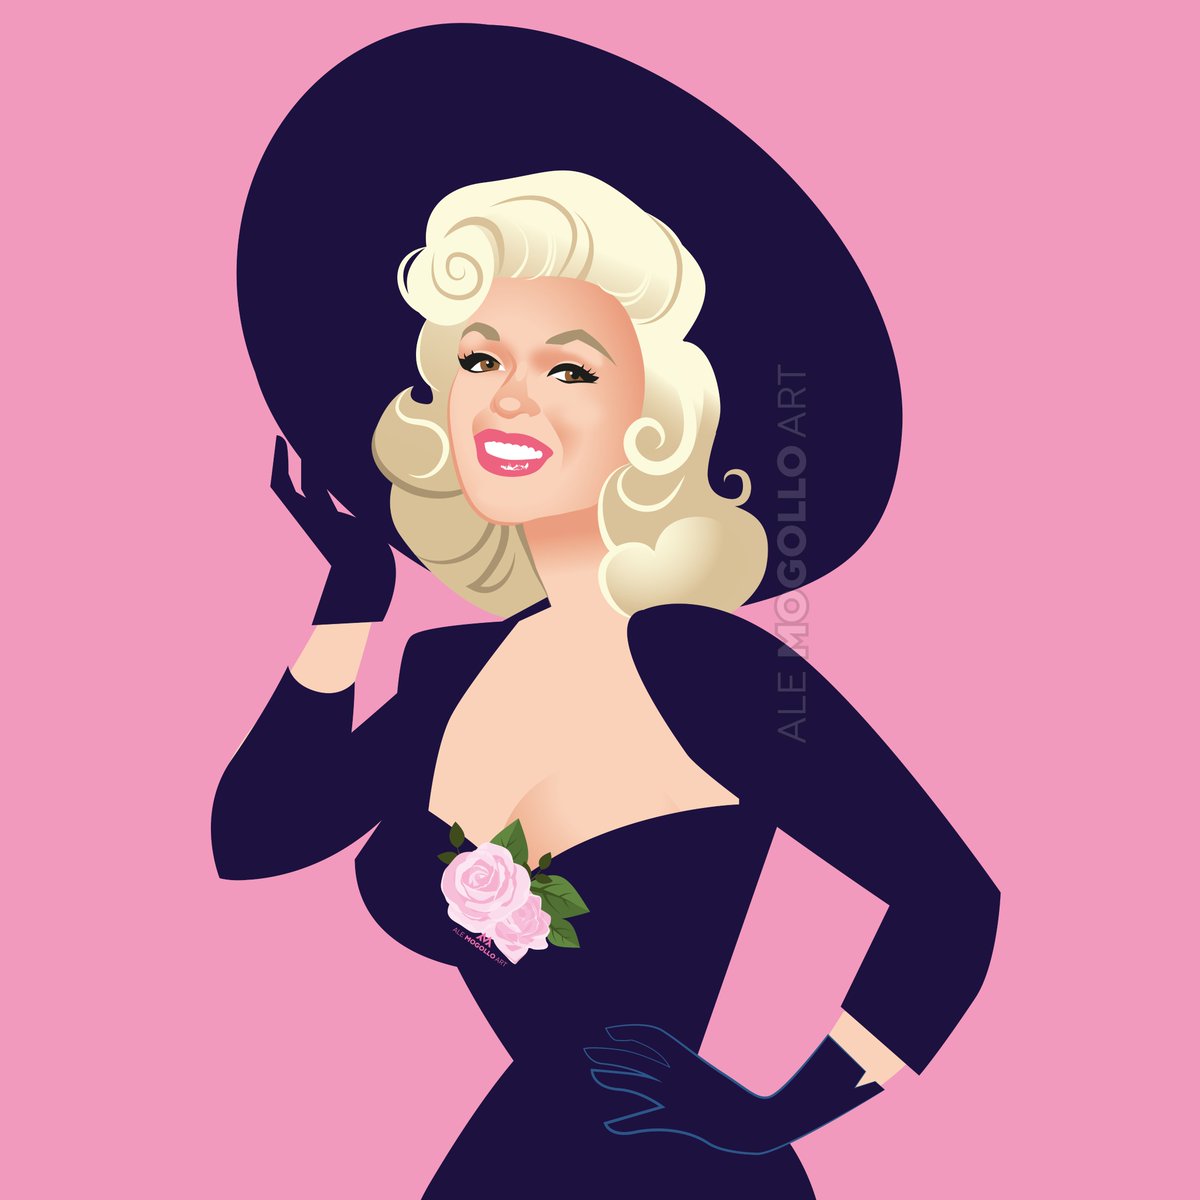 'She can't help it, the girl can't help it“ Remembering the wonderful Jayne Mansfield on her birthday. Simply 'The girl can't help it' 🤪 #jaynemansfield #thegirlcanthelpit #oldhollywood #TCMParty #alejandromogolloart